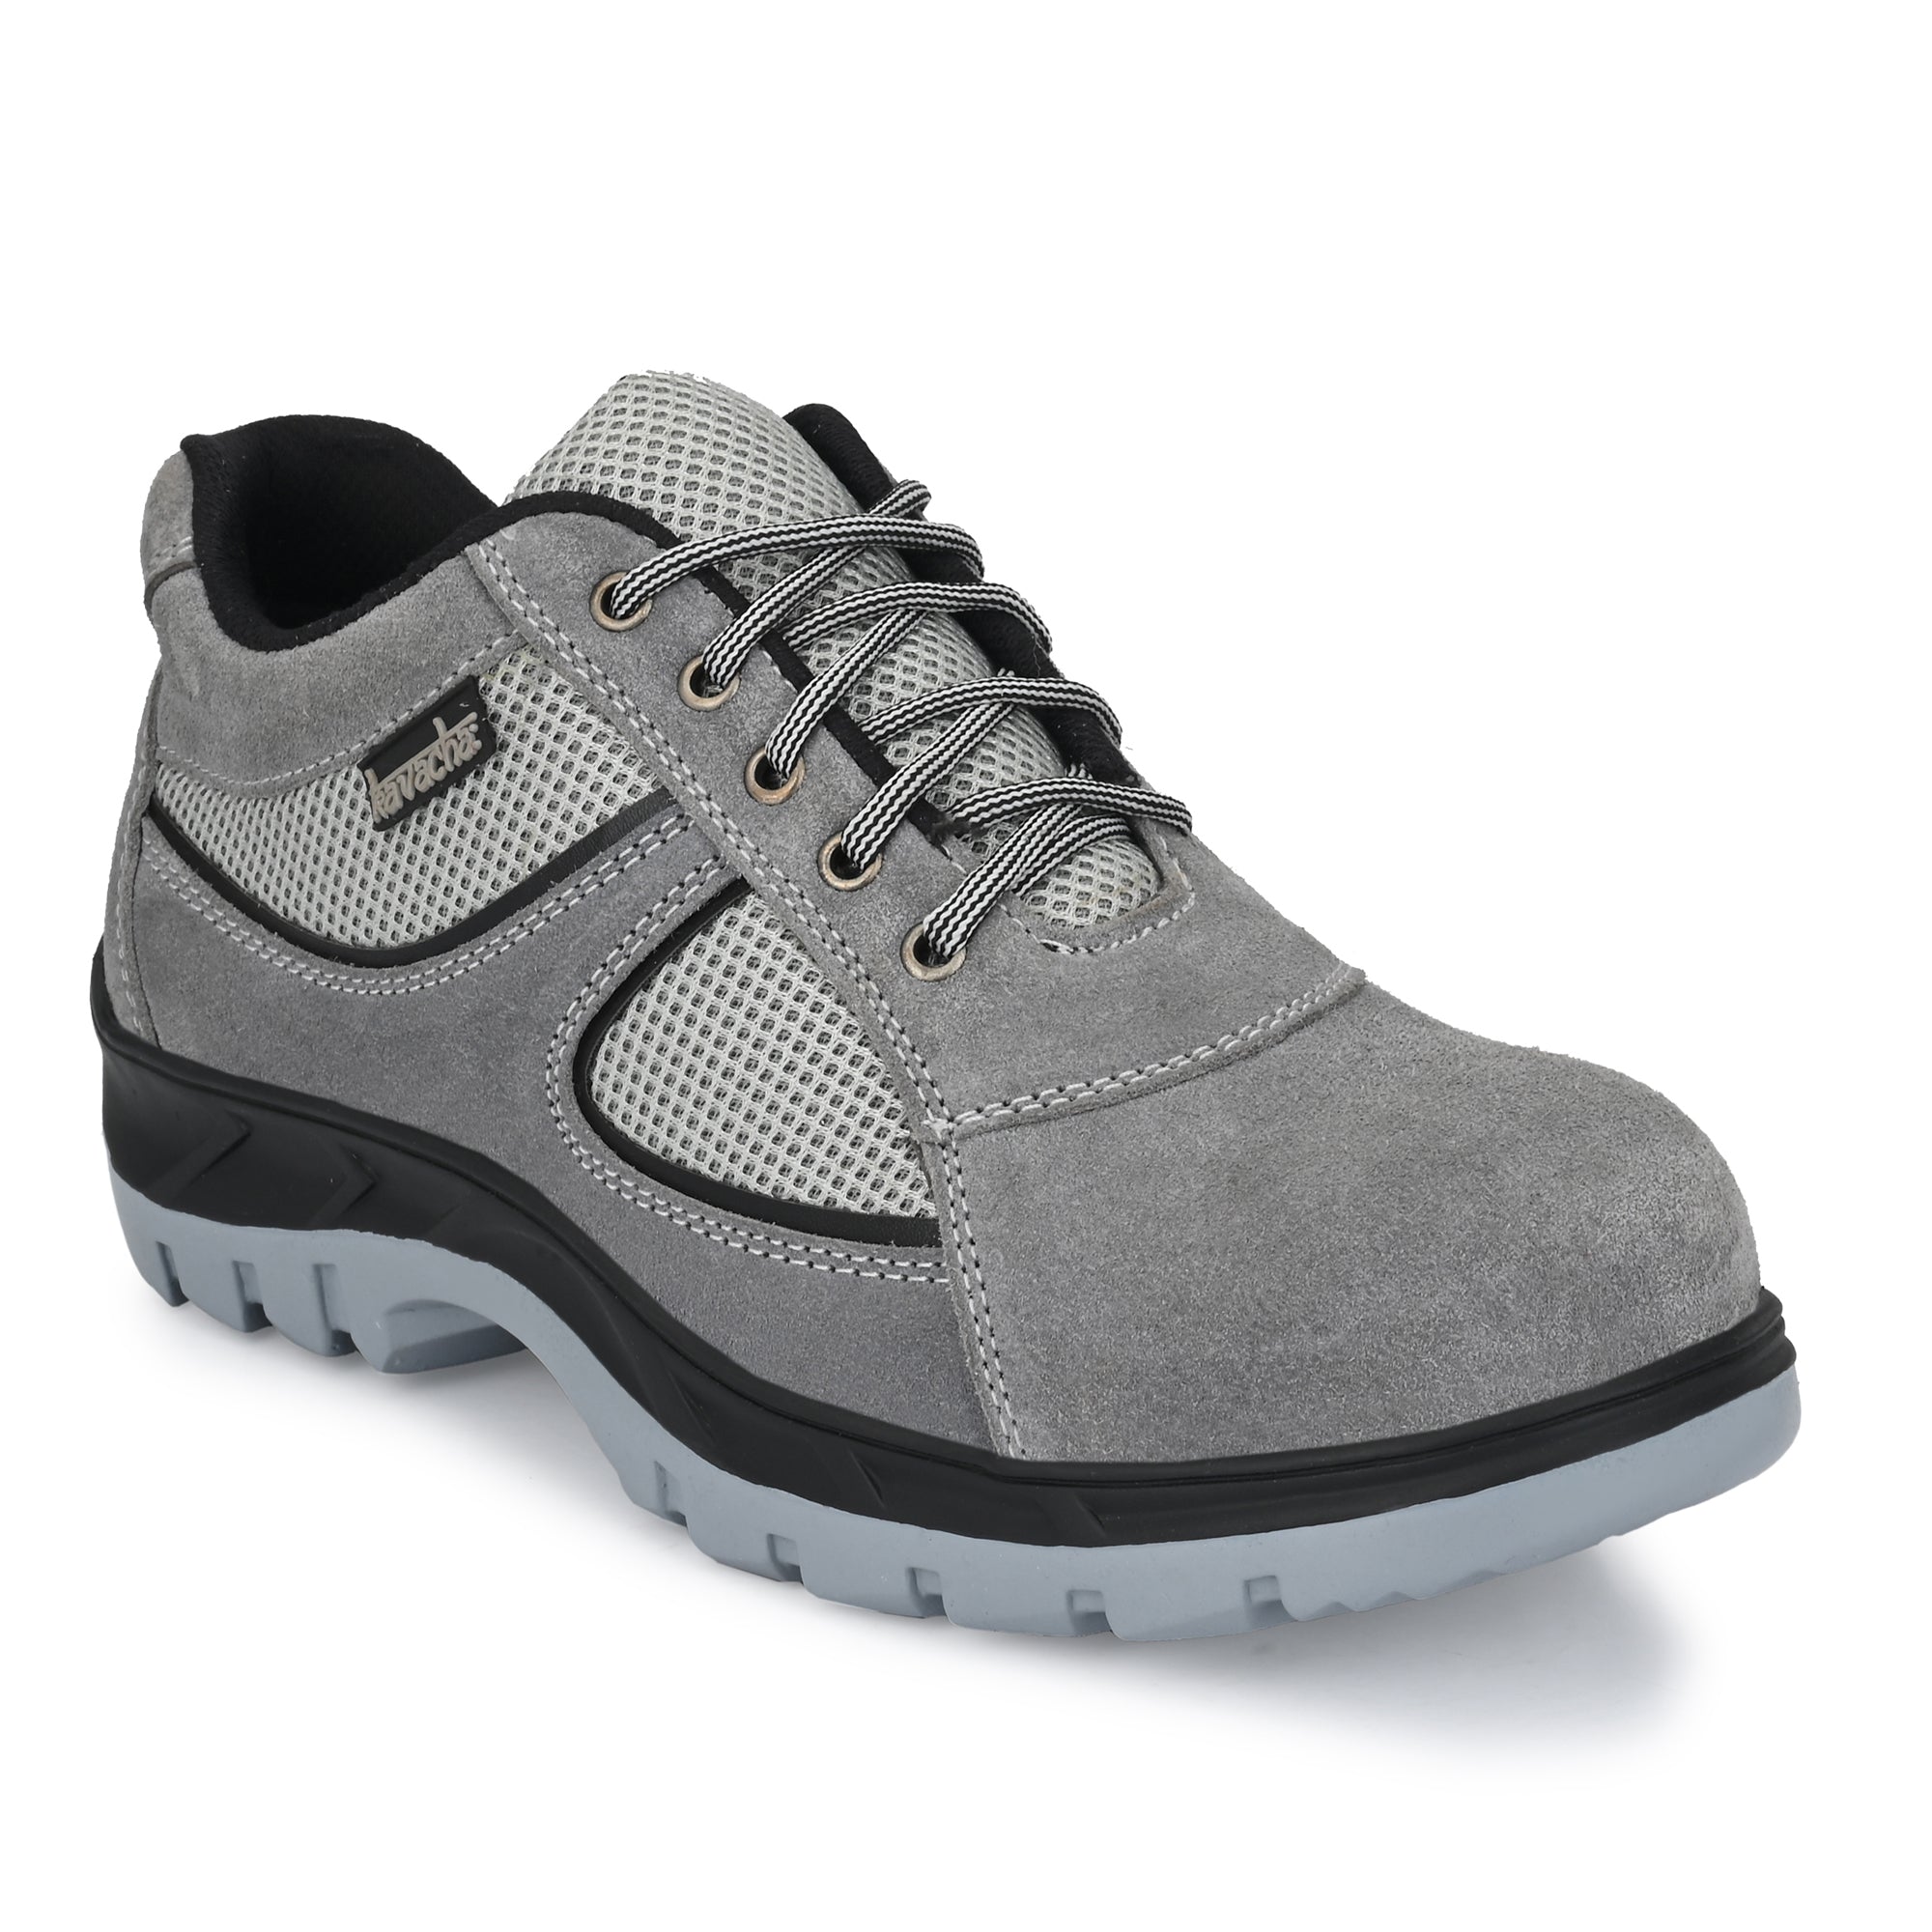 Kavacha Suede Leather Steel Toe Safety Shoe , S111 (Grey)